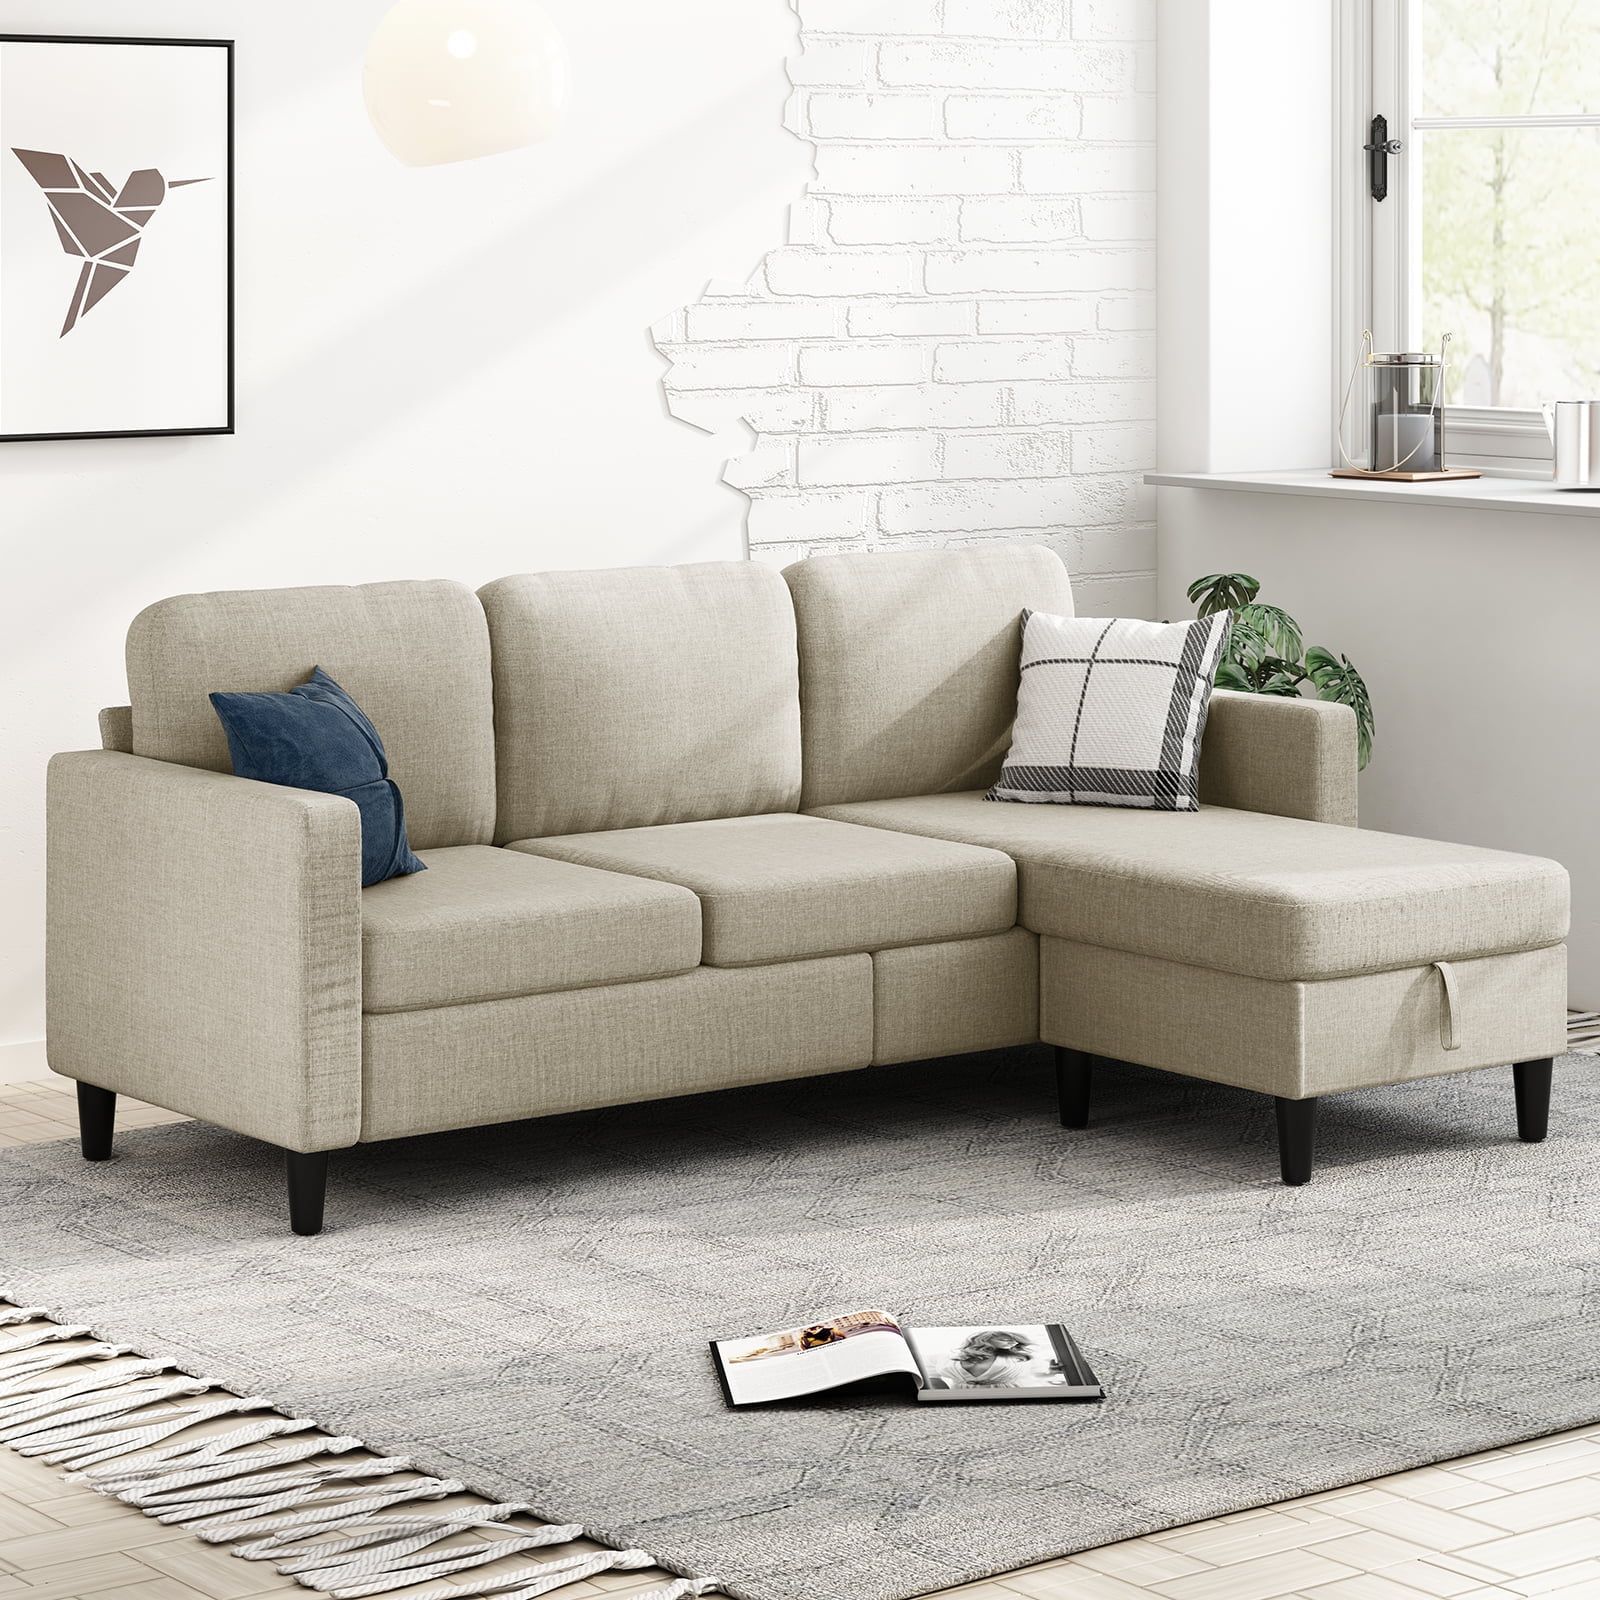 Featured Photo of 15 Photos Small L Shaped Sectional Sofas in Beige